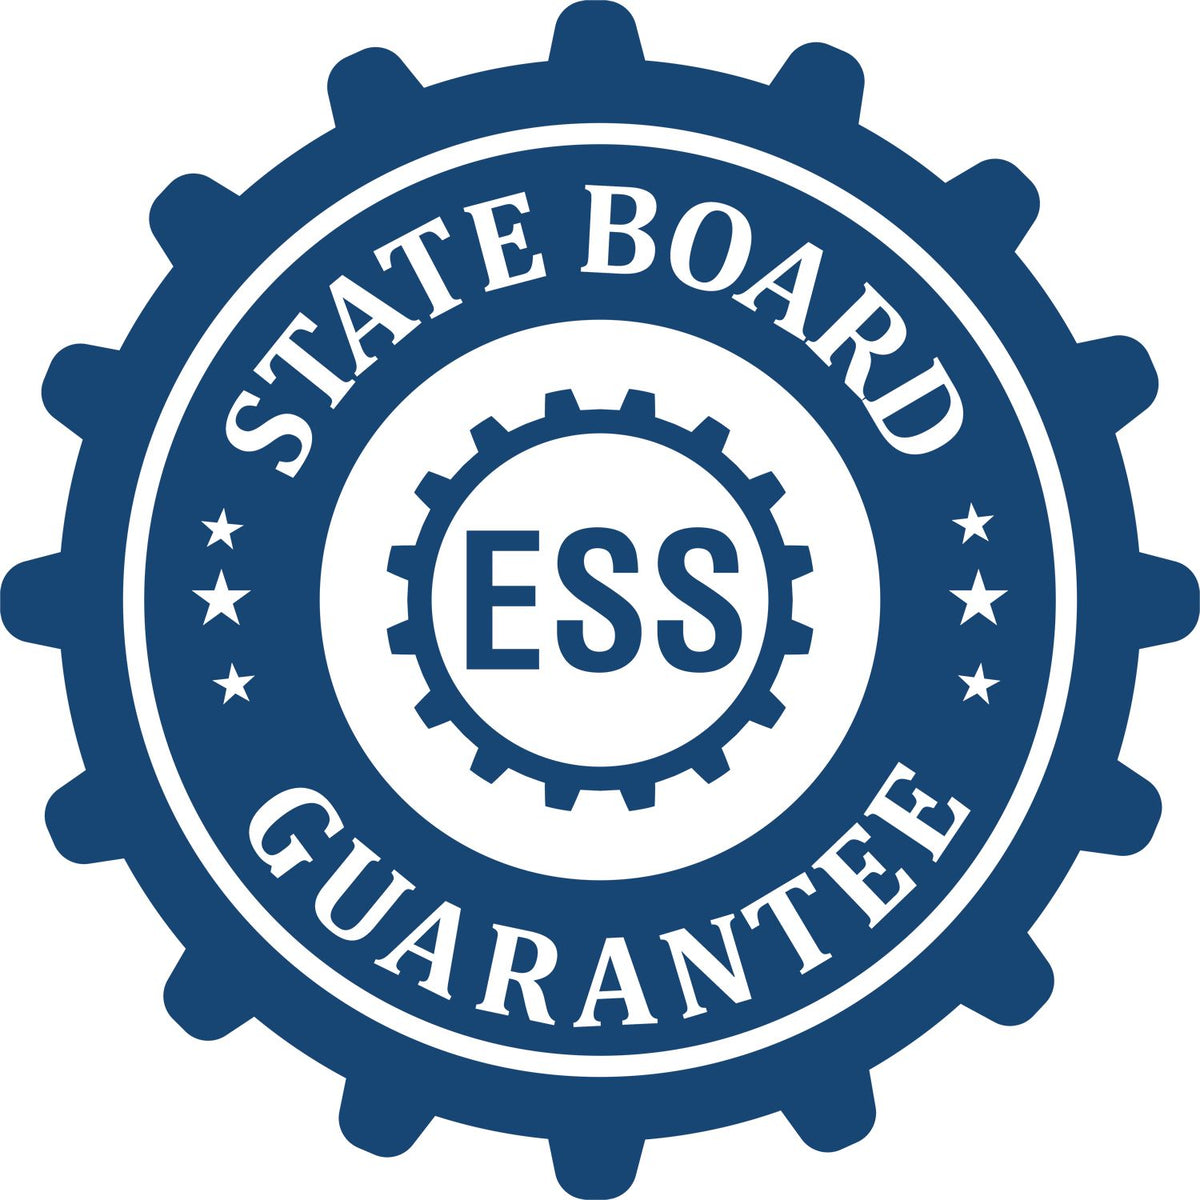 An emblem in a gear shape illustrating a state board guarantee for the Heavy-Duty South Carolina Rectangular Notary Stamp product.